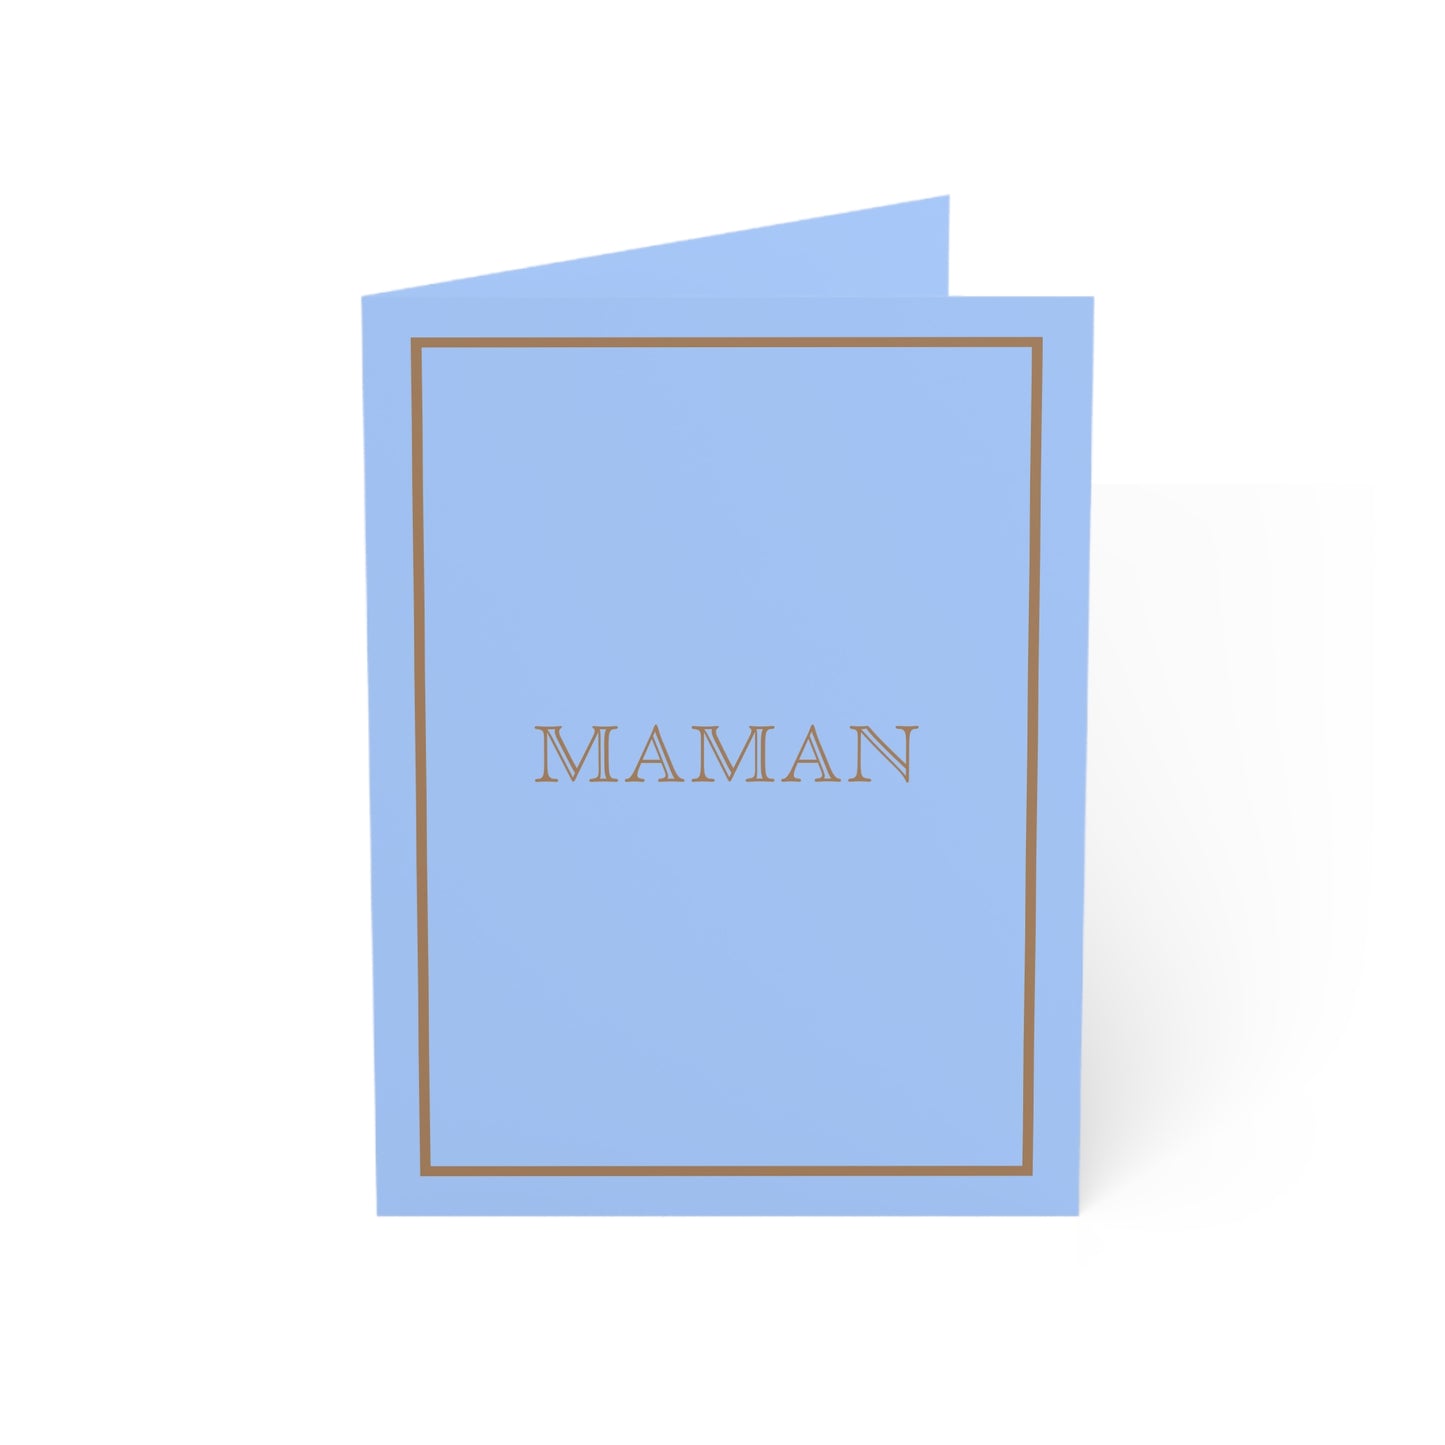 Maman Cards in Blue